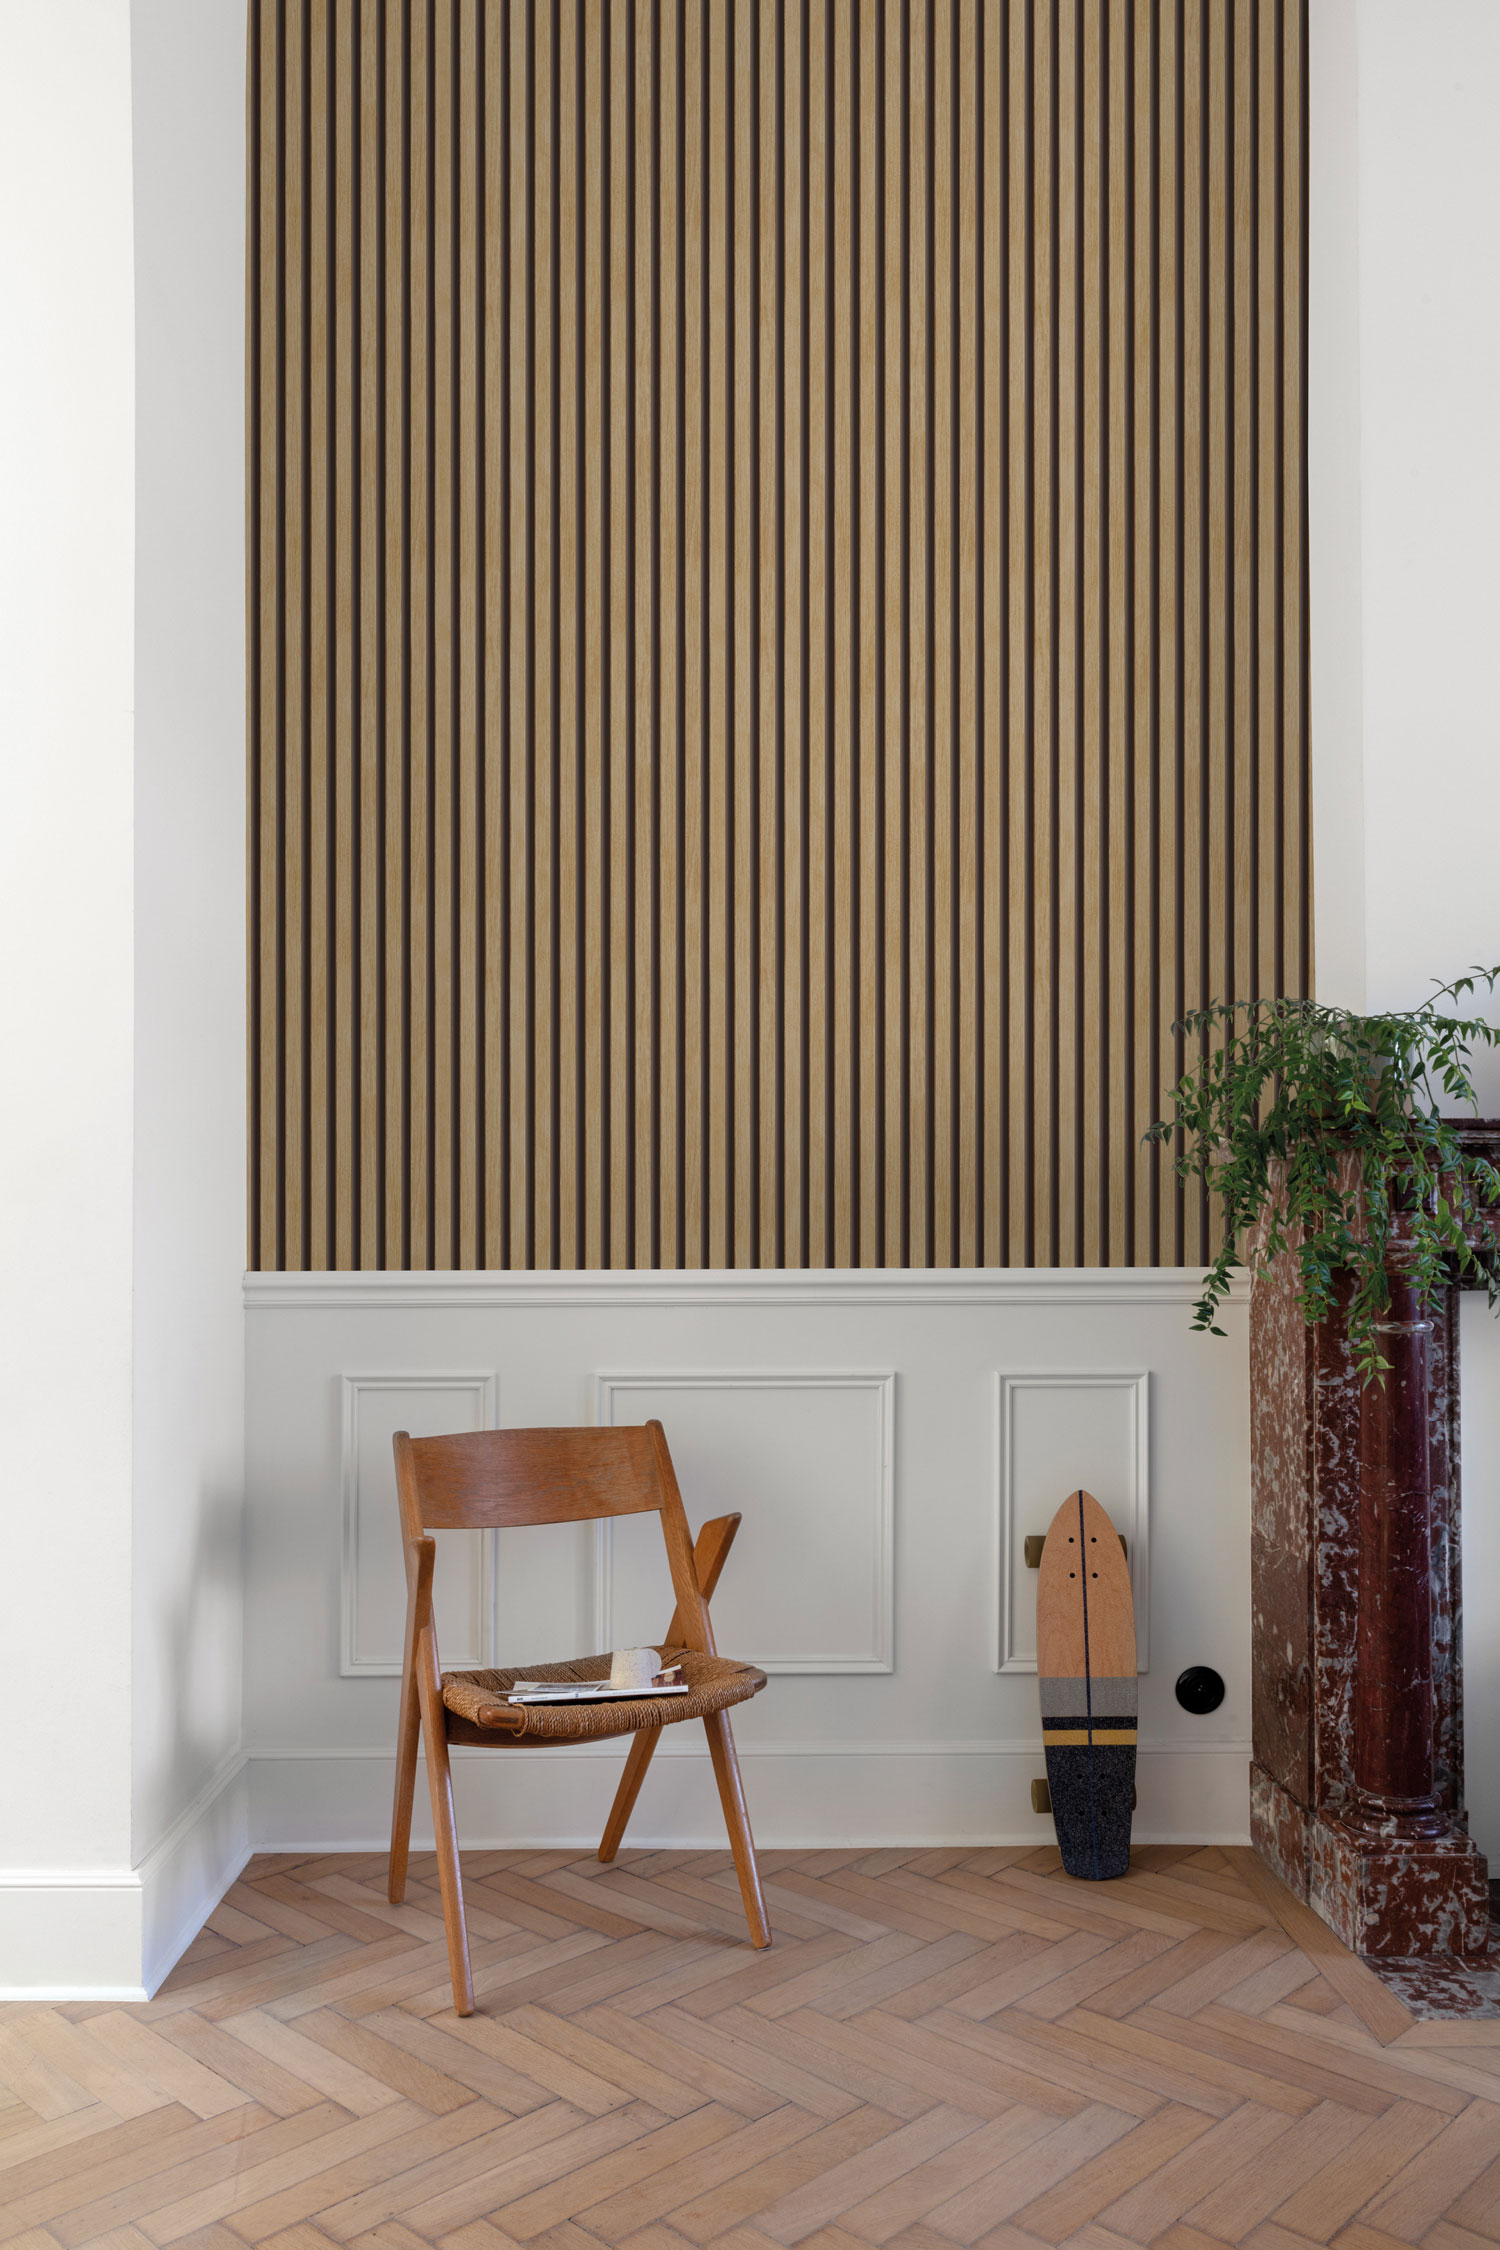 Wallpaper with an imitation of wooden lamella material